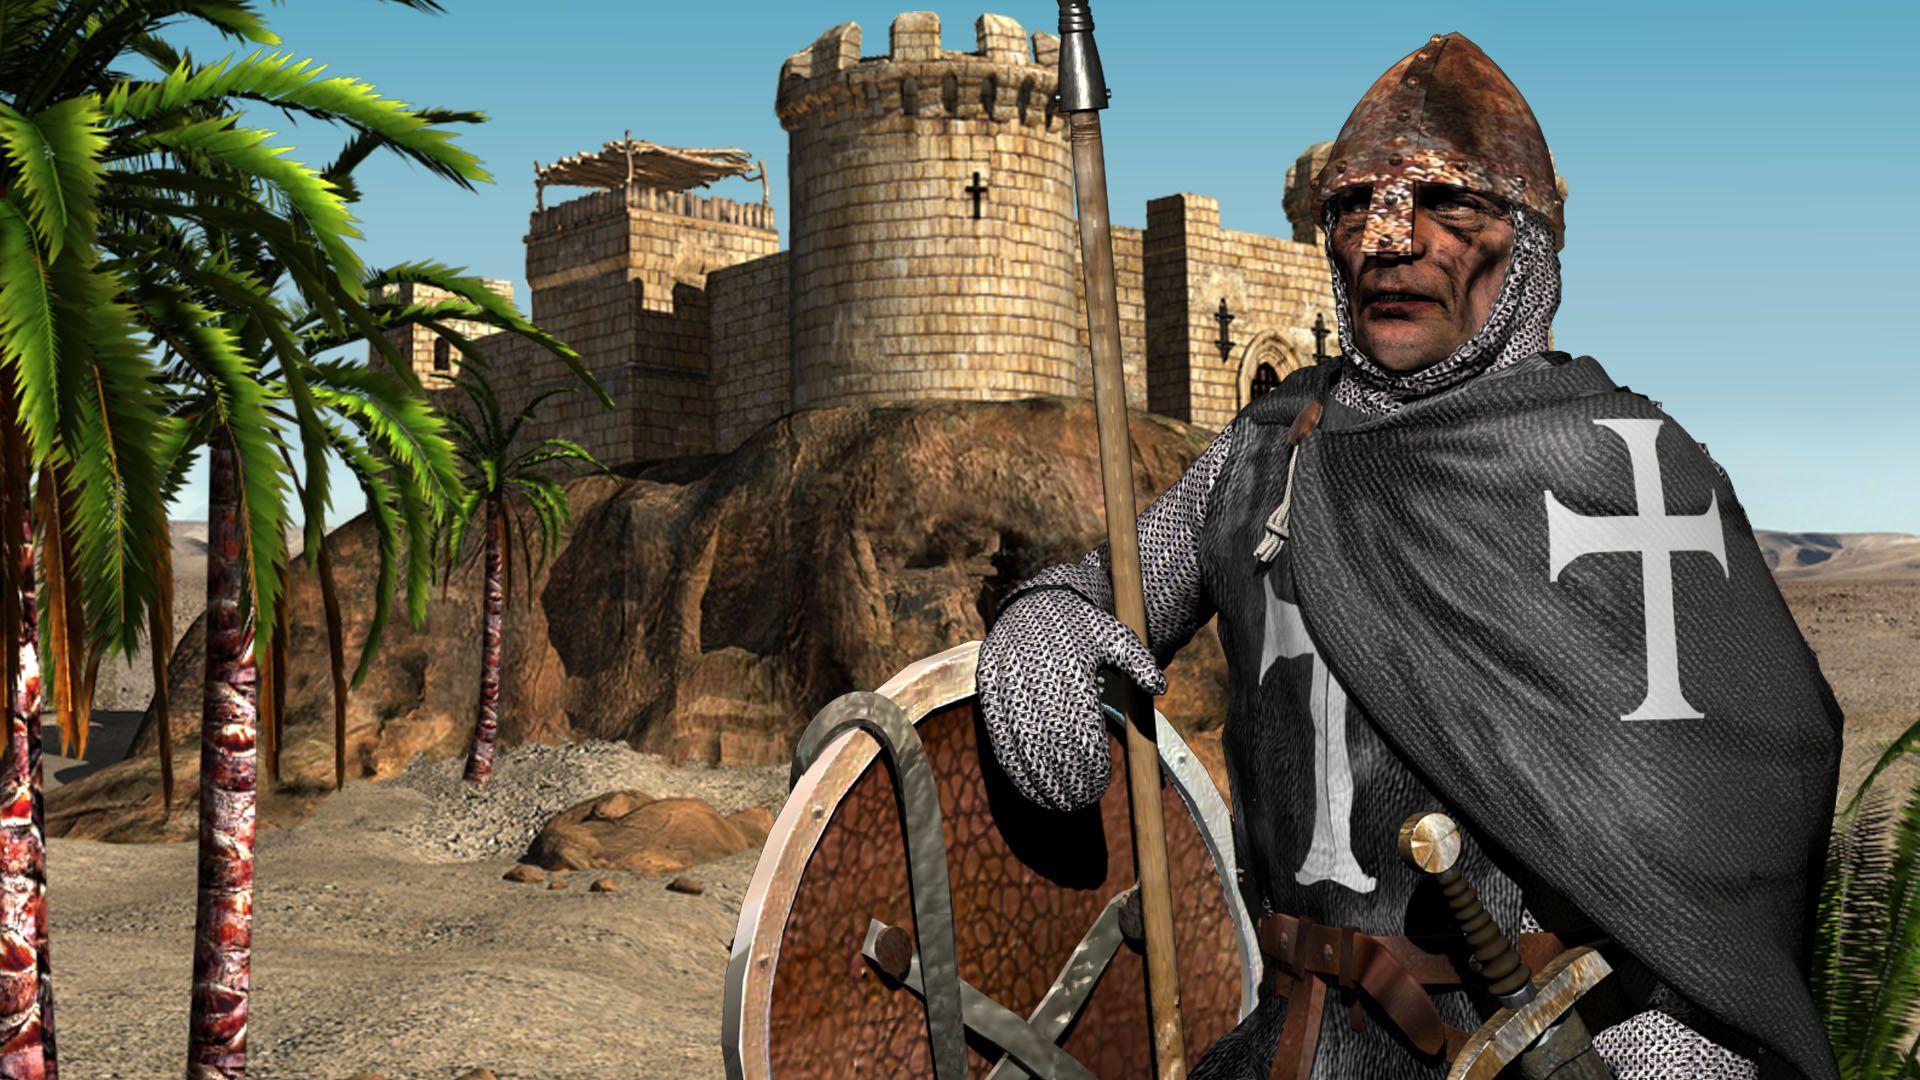 Wallpaper Wallpaper from Stronghold: Crusader II